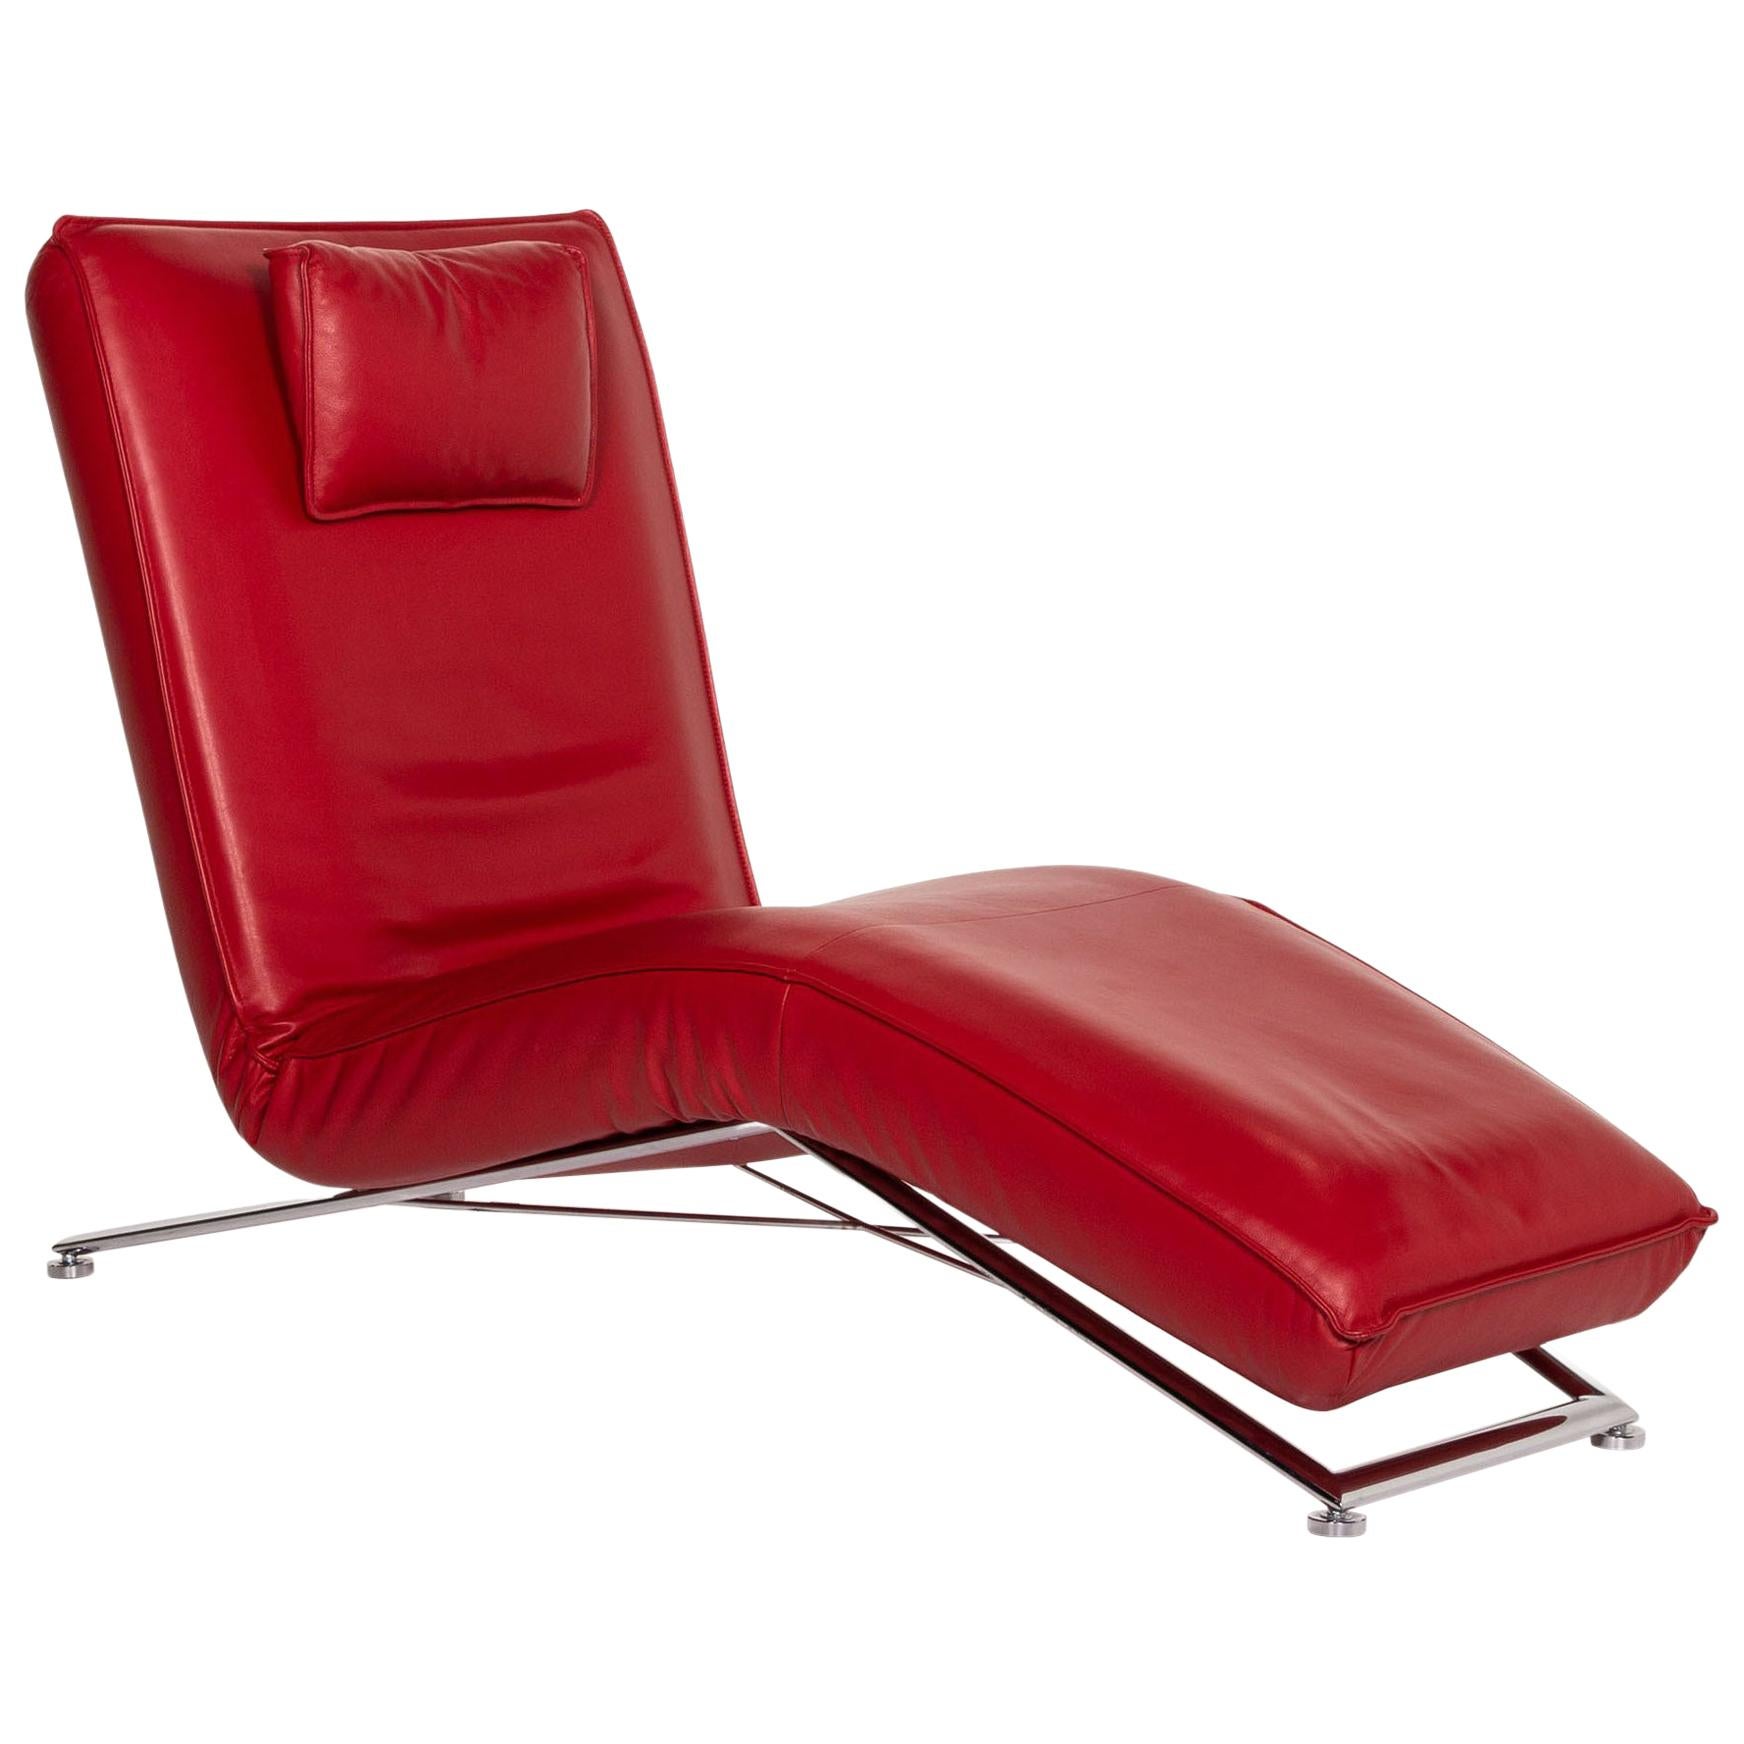 KoinorJeremiah Leather Lounger Red Relaxation Function Relaxation Lounger